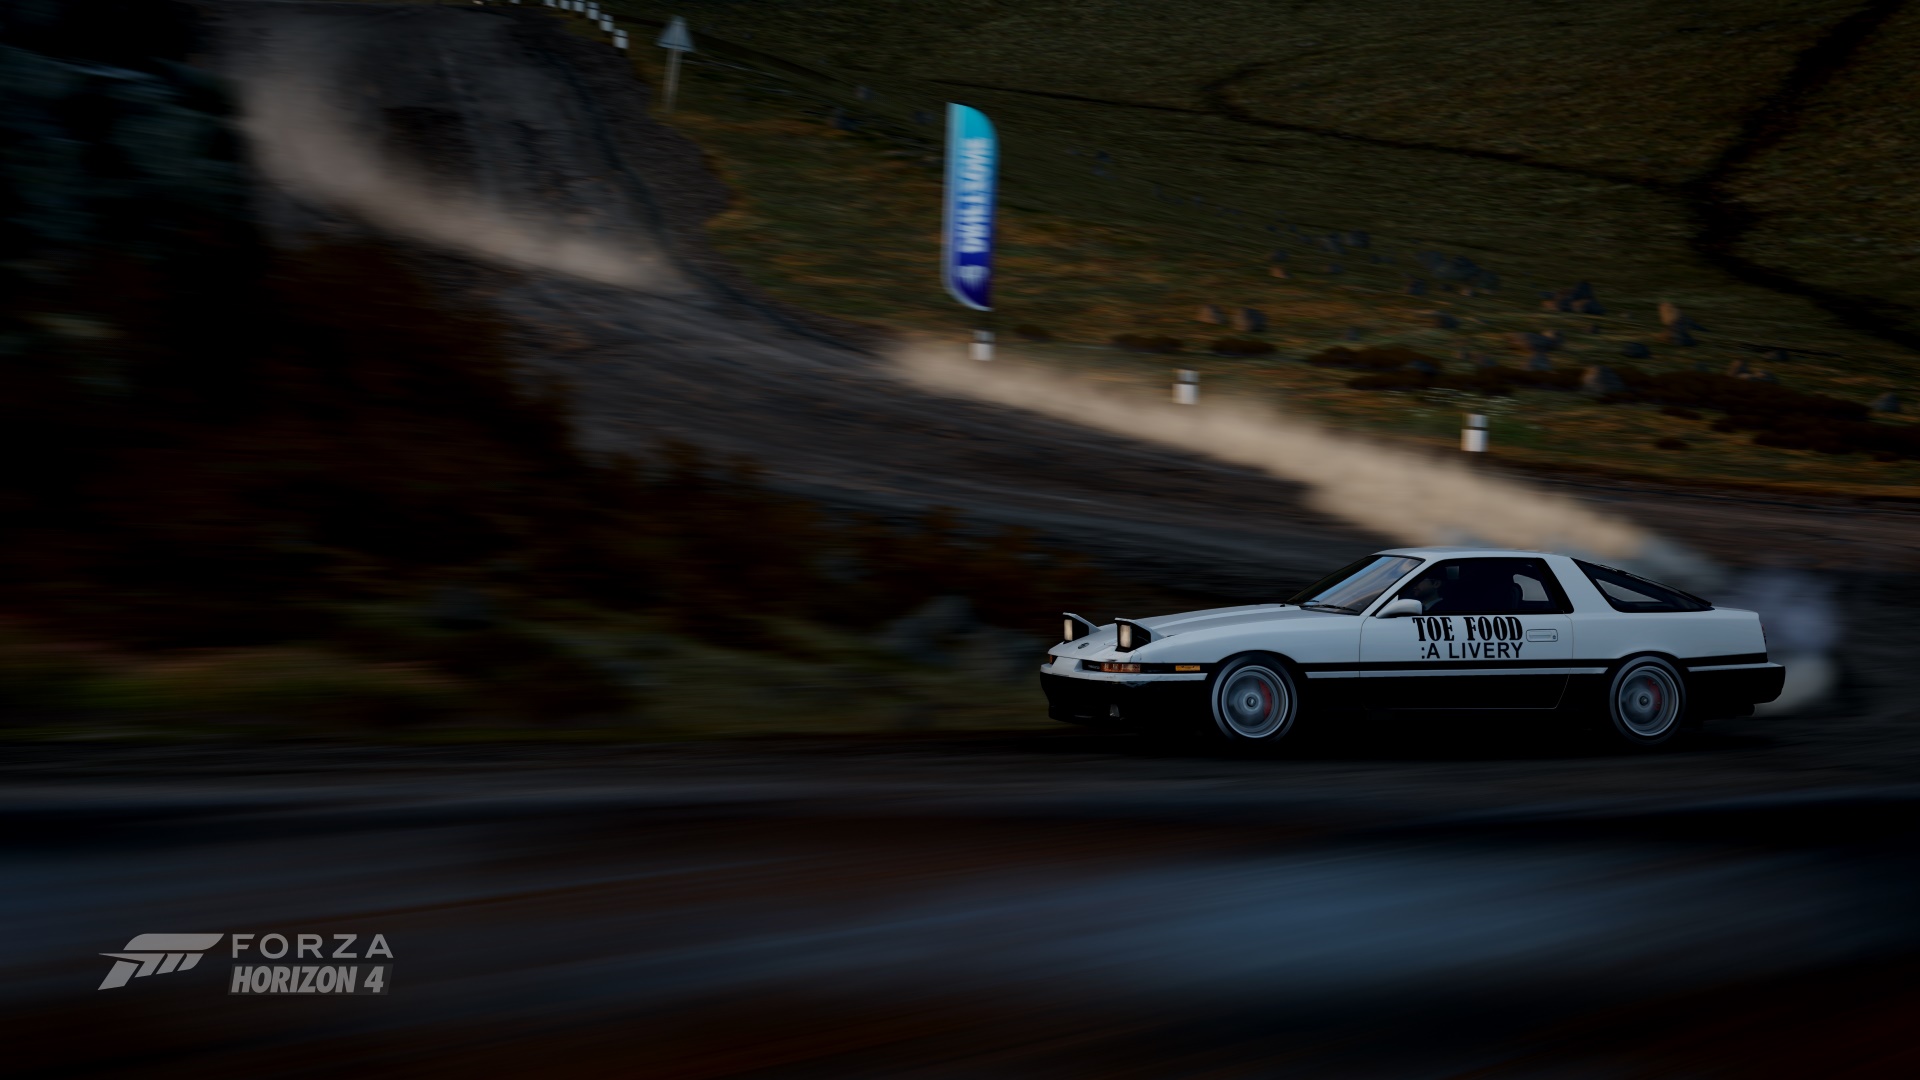 1992 Toyota Supra painted in the patern of a white AE86 with the text "Toe Food: A Livery" on the side